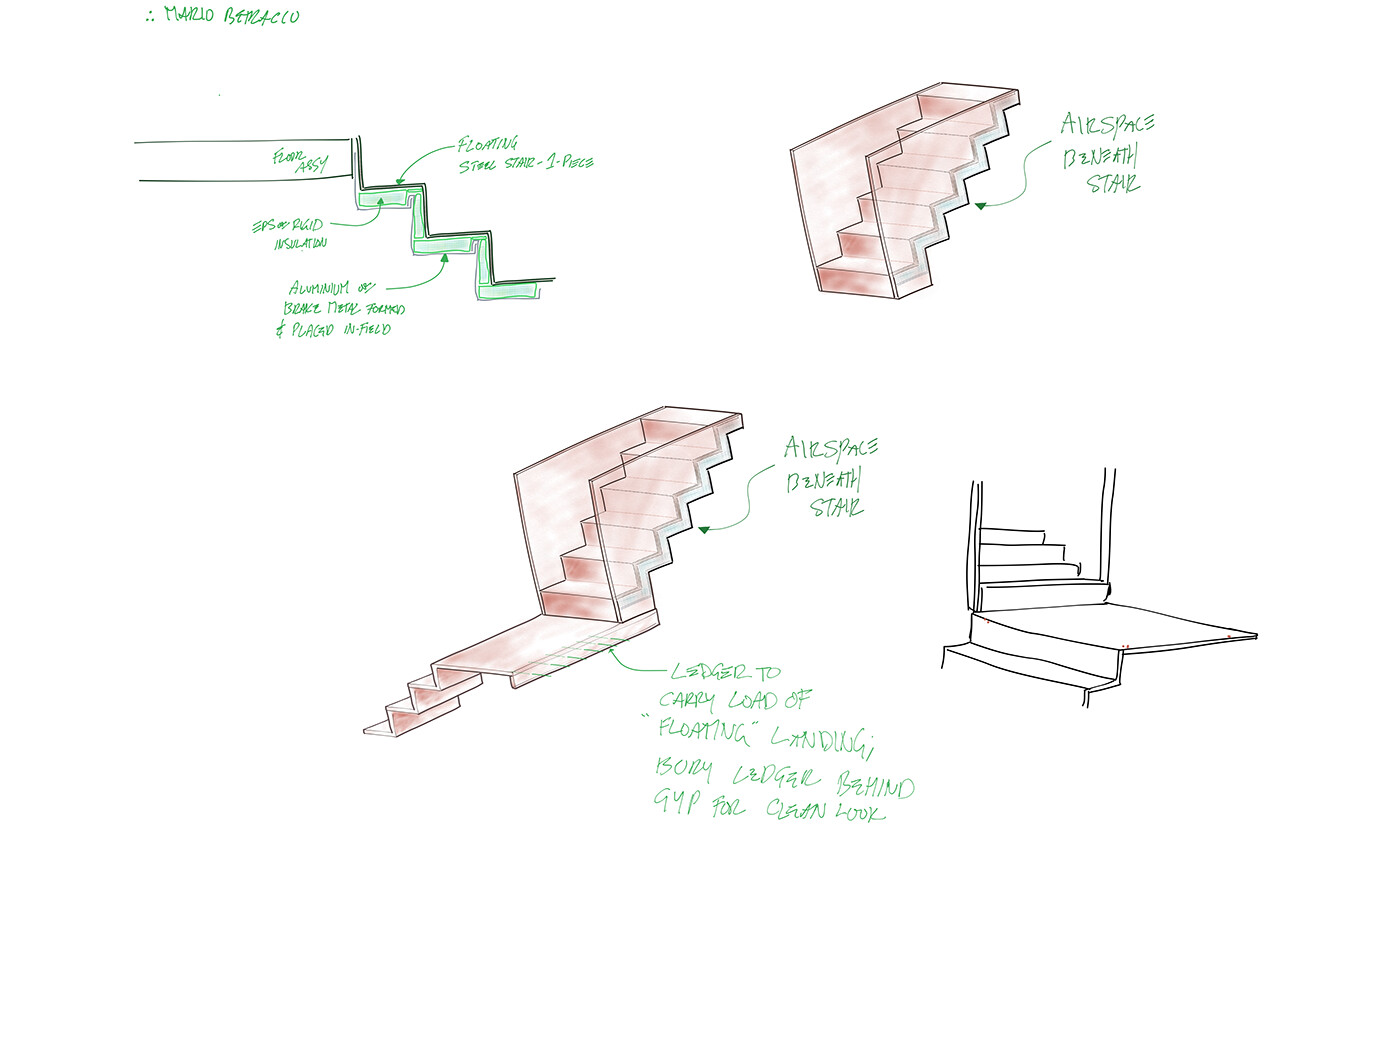 Here is the hand-drawn sketch originating those stair ideas: as you can see, computers are not required for 3D thinking. That's how a designer should think to begin with!